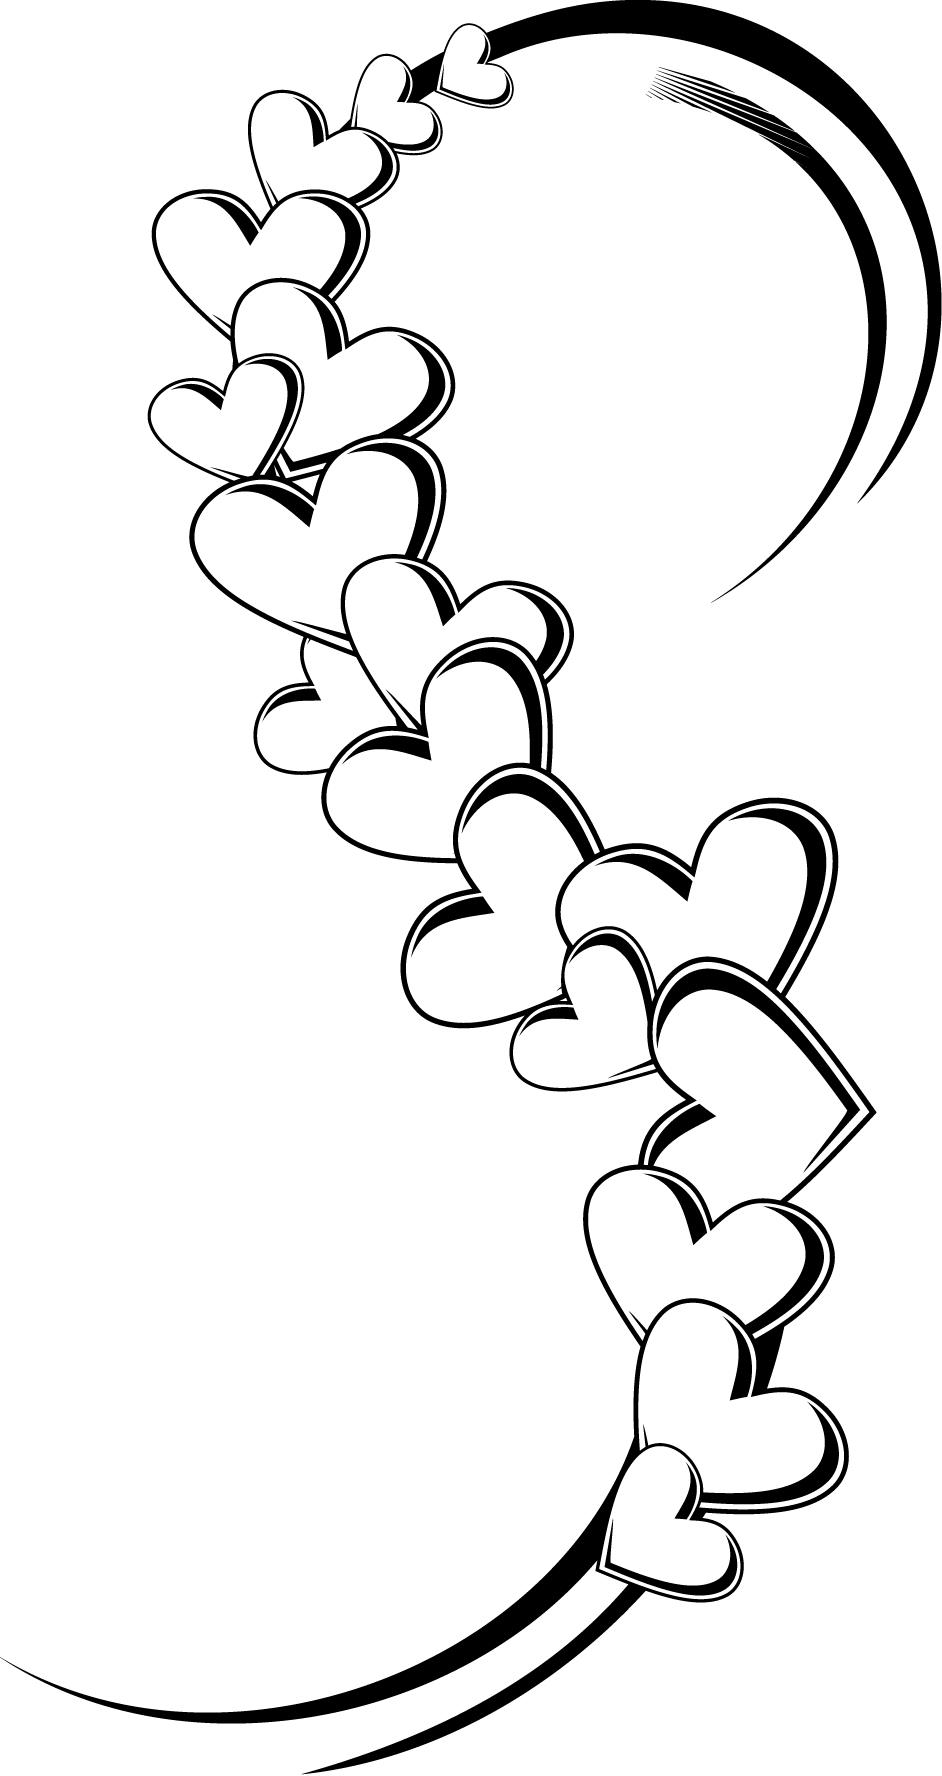 Coloring Pages Of Hearts And Flowers - ClipArt Best